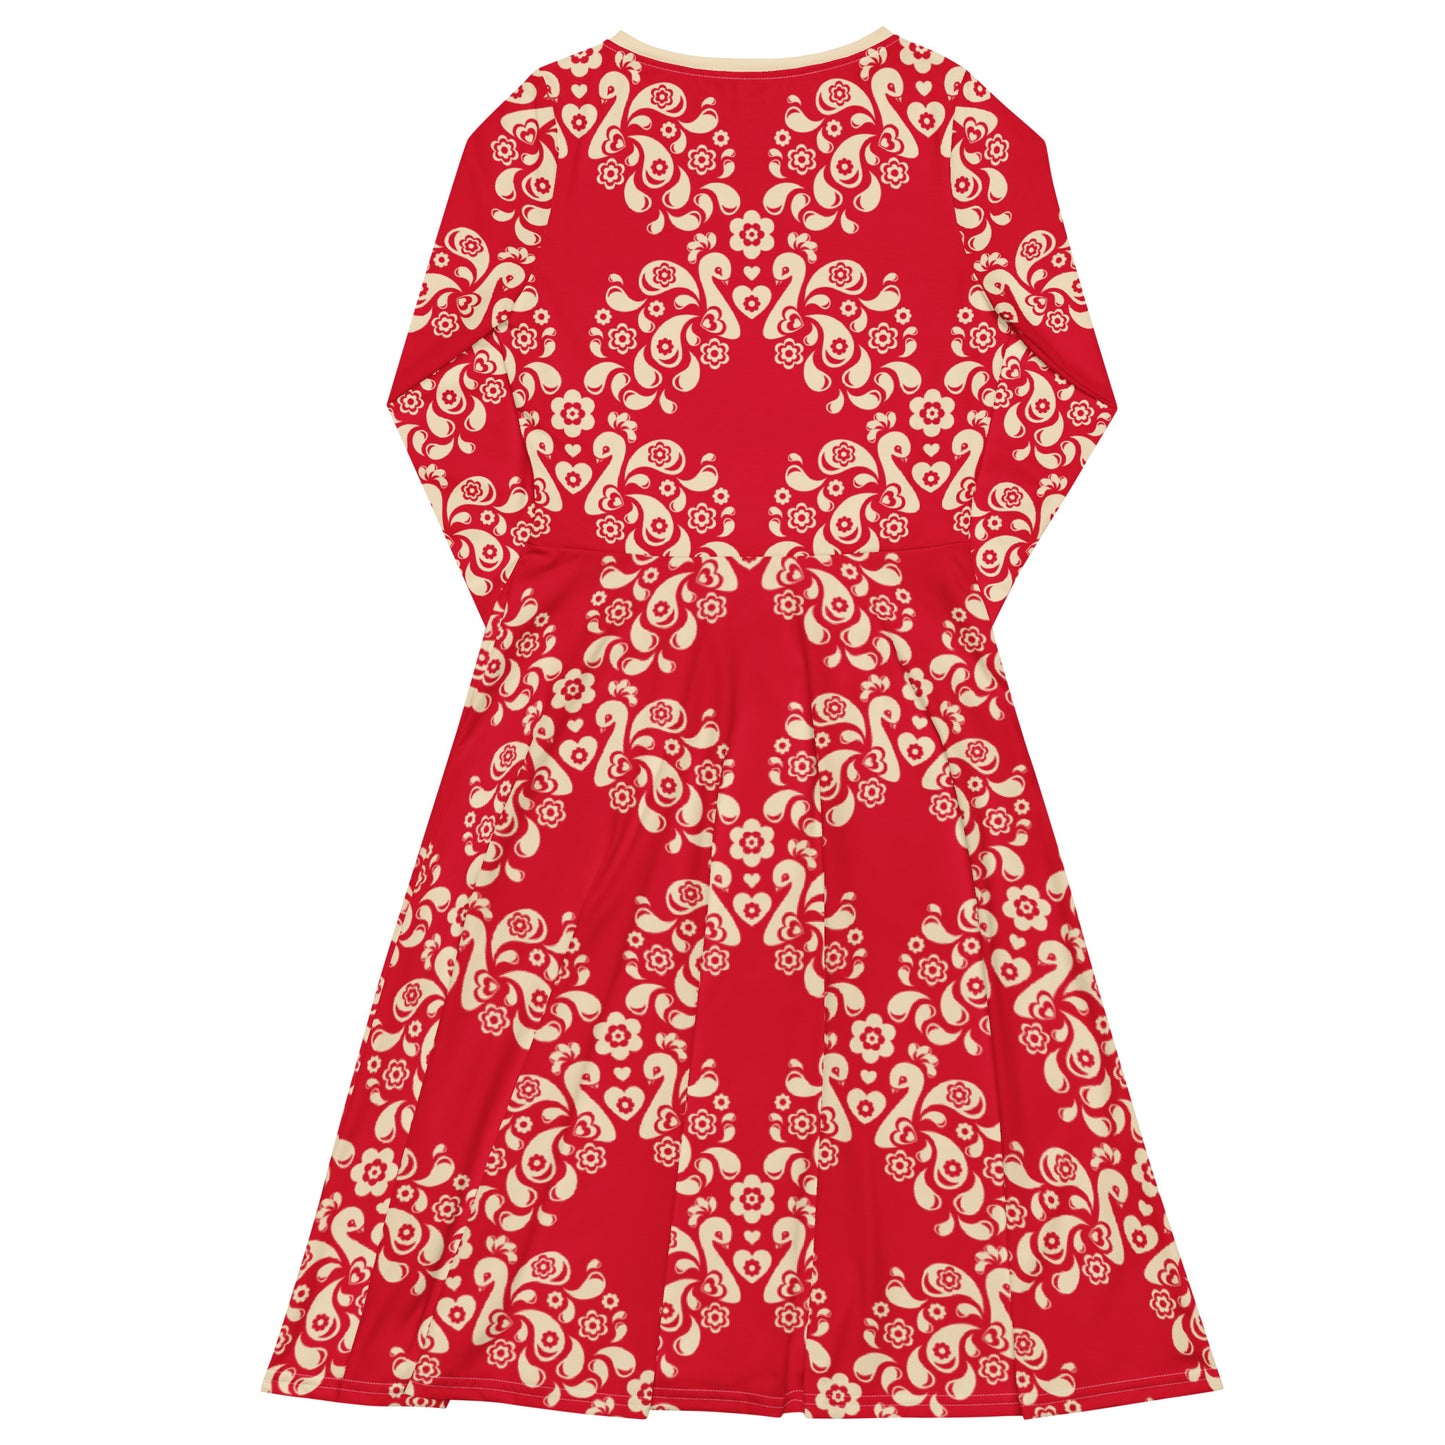 PEACOCK LOVE red - Midi dress with long sleeves and handy pockets